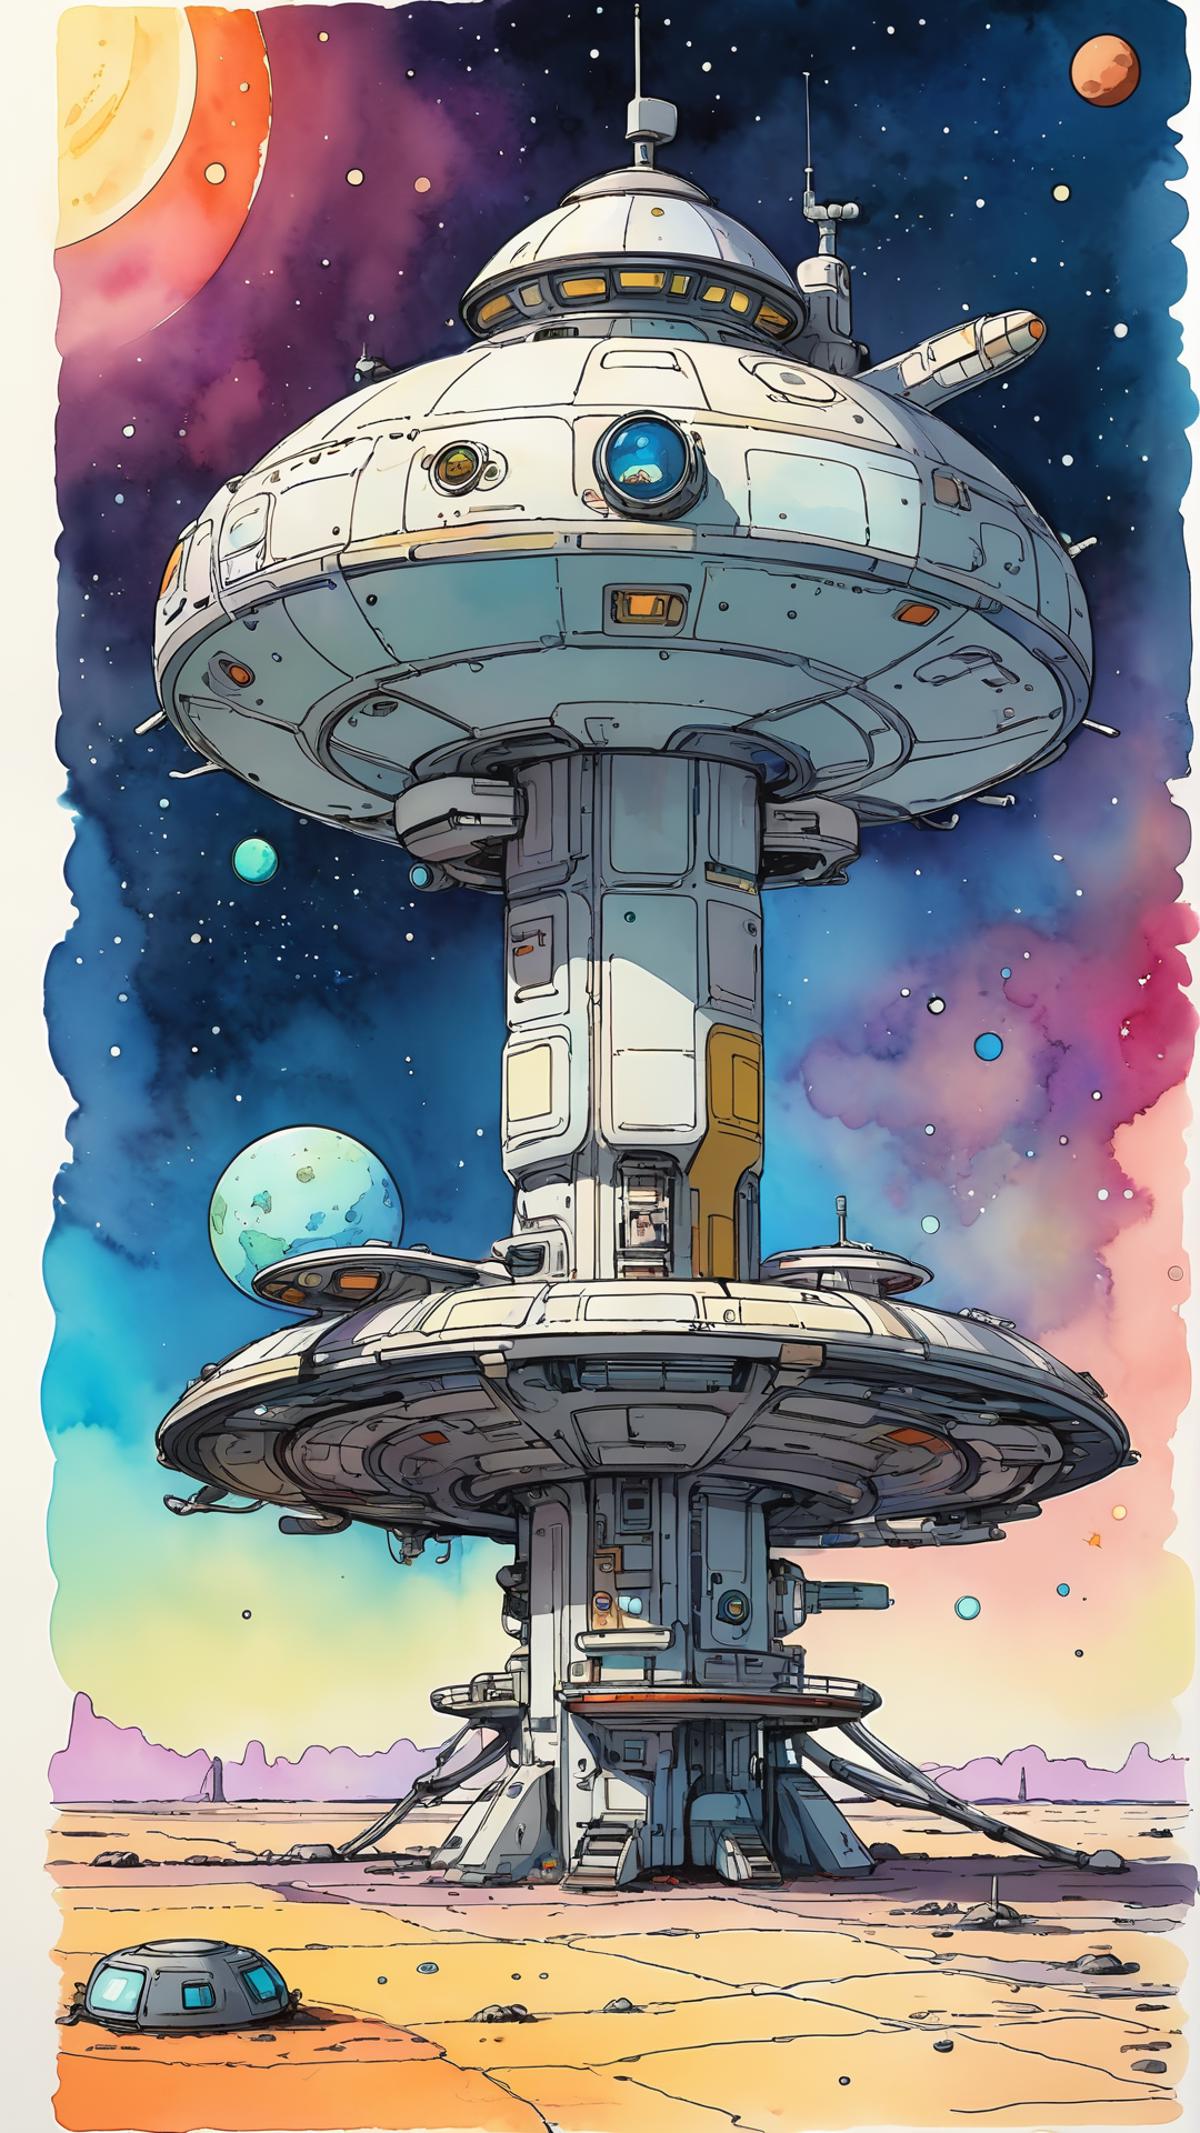 A colorful illustration of a tall building and a space station with multiple planets in the background.